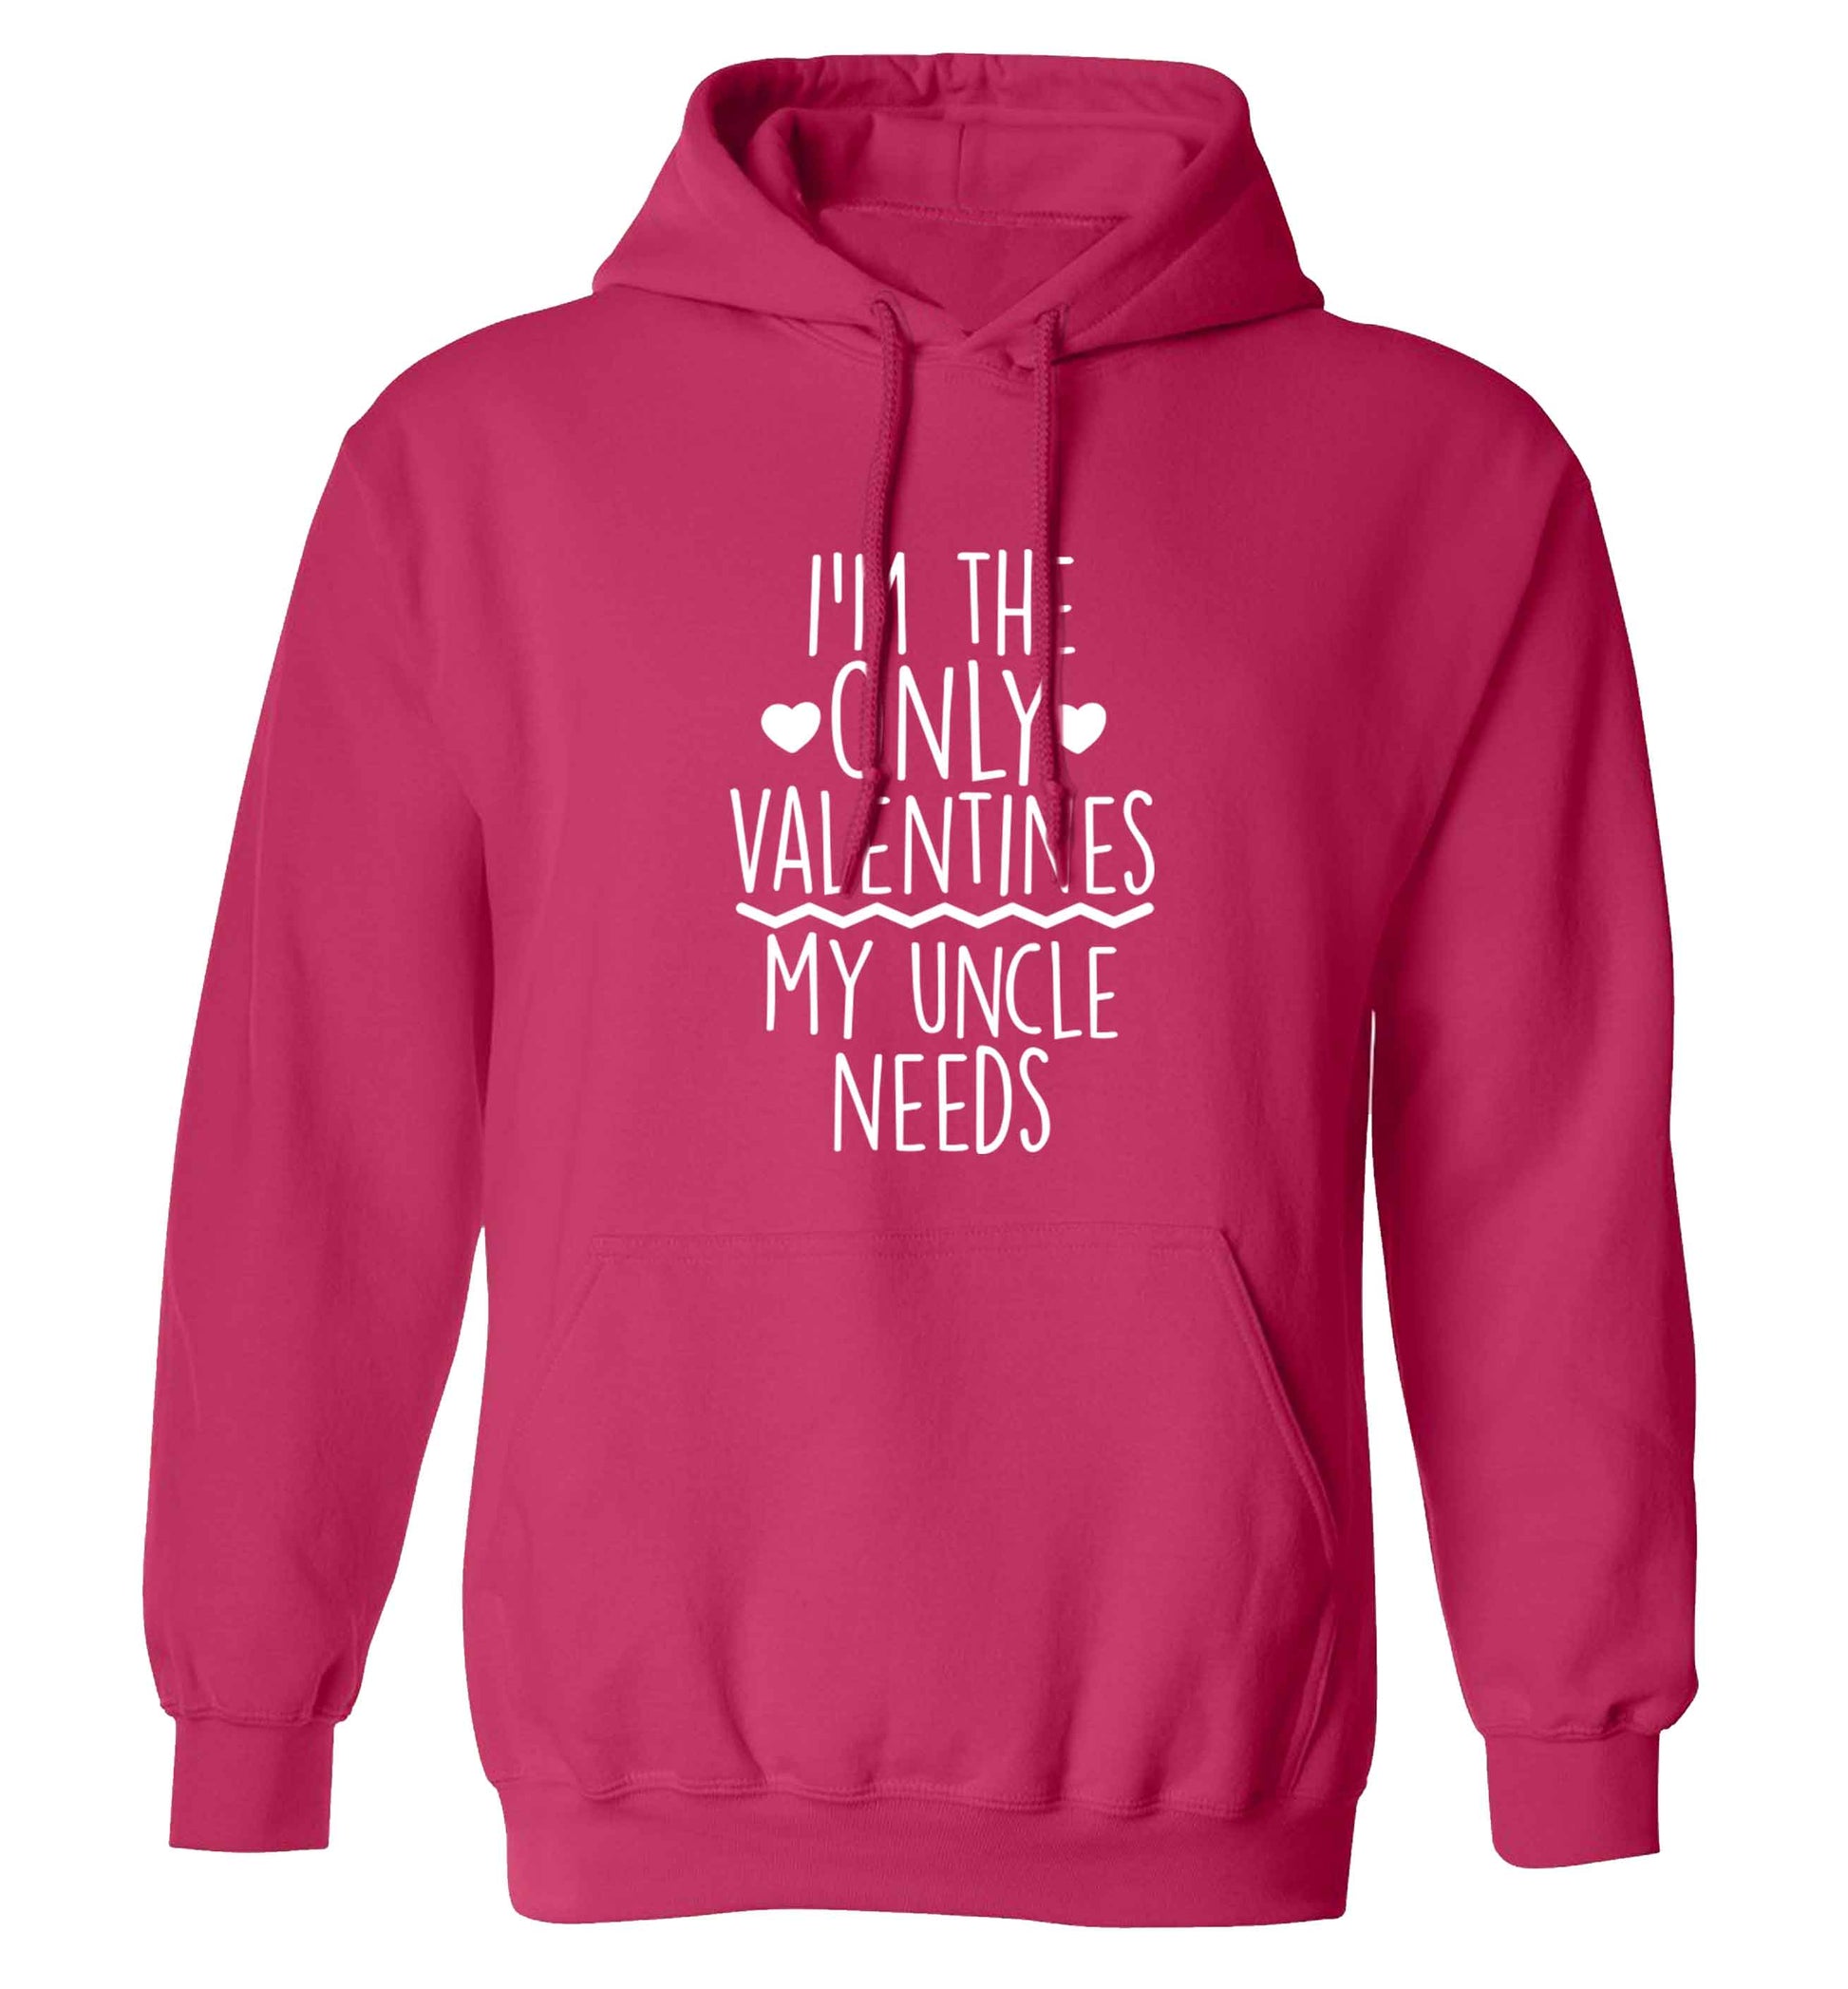 I'm the only valentines my uncle needs adults unisex pink hoodie 2XL